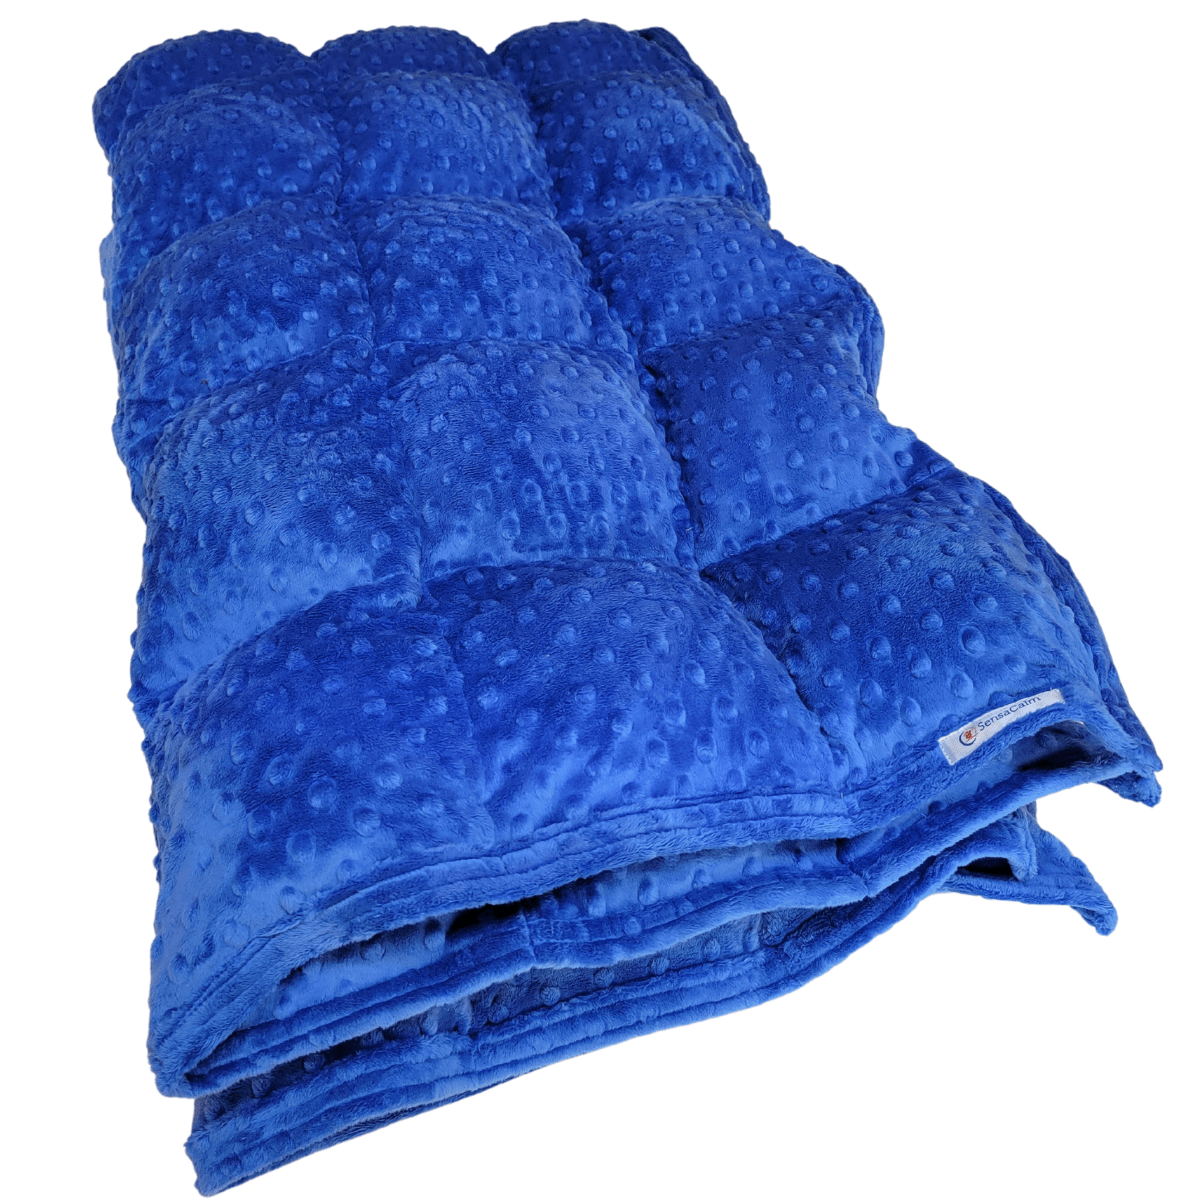 Dimple Cuddle Weighted Blanket - Electric Blue